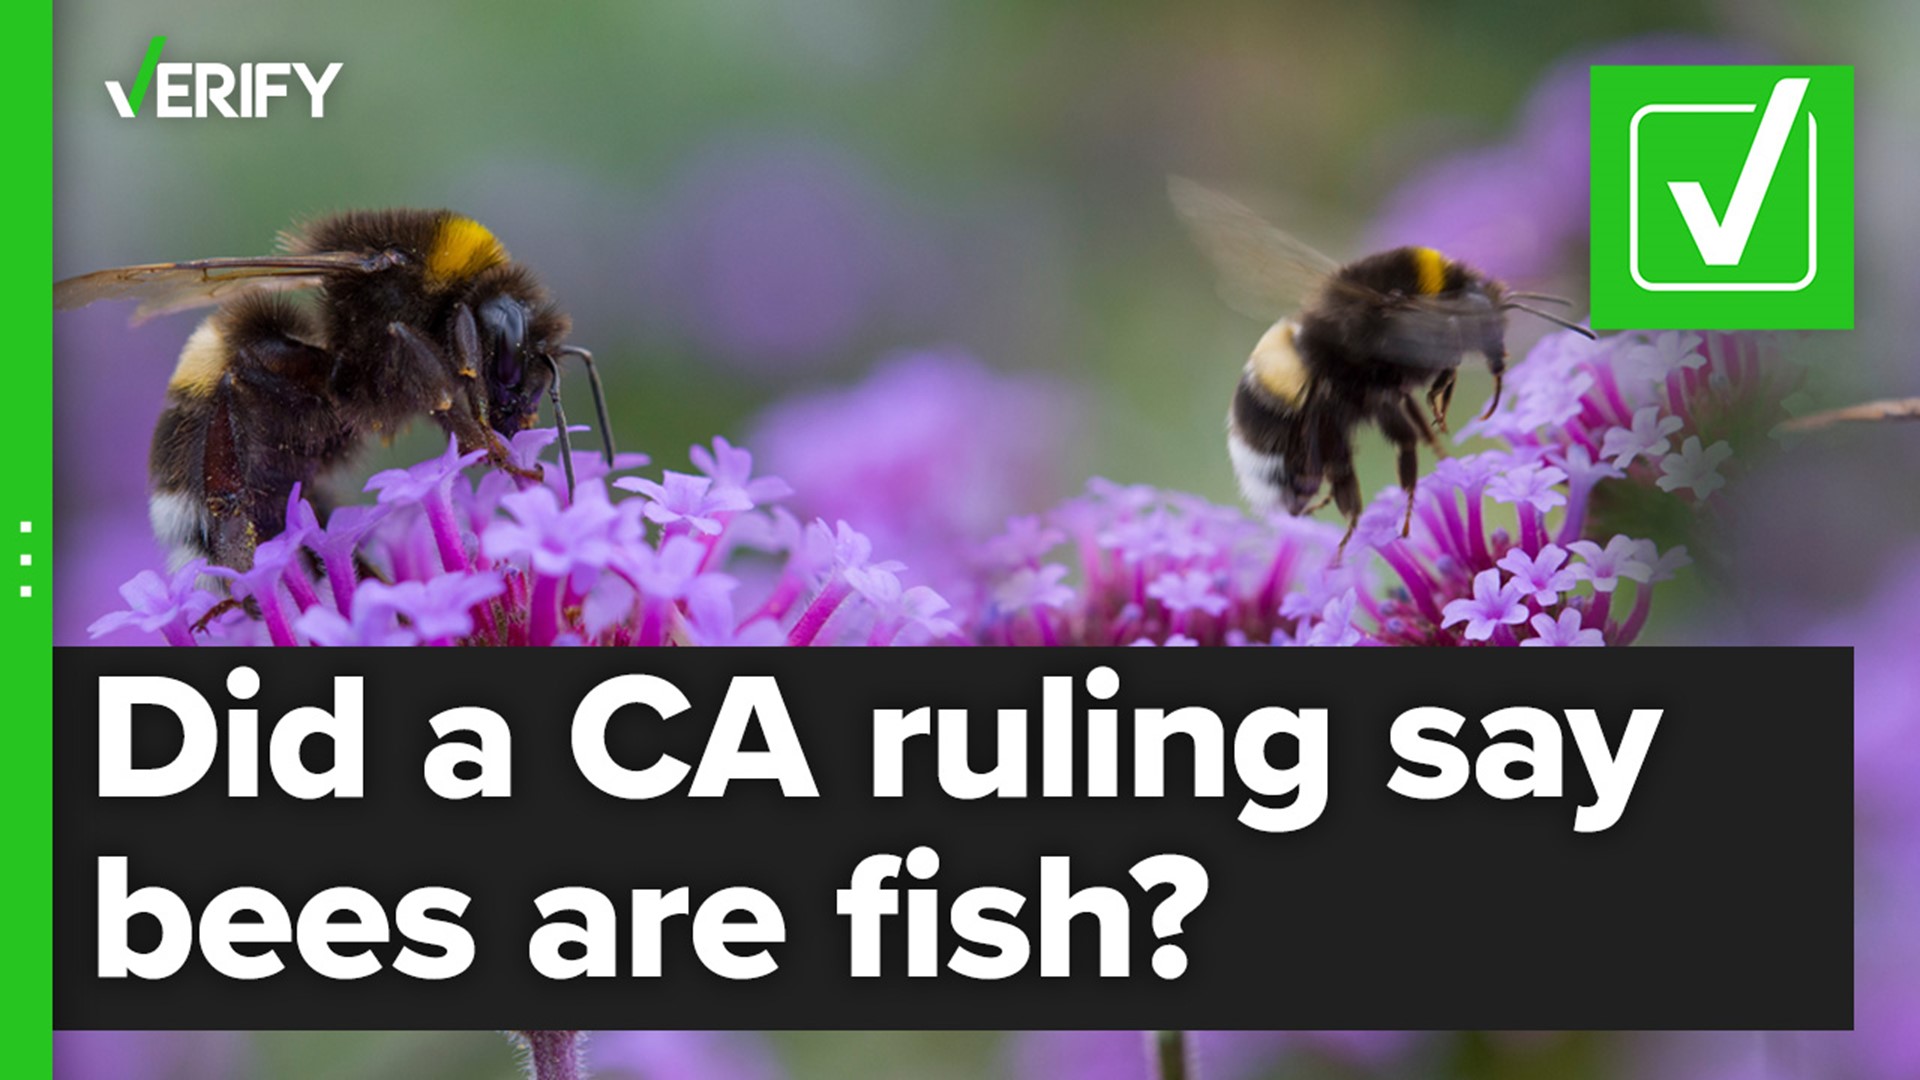 A recent California ruling classified bees as fish, because both are invertebrates.